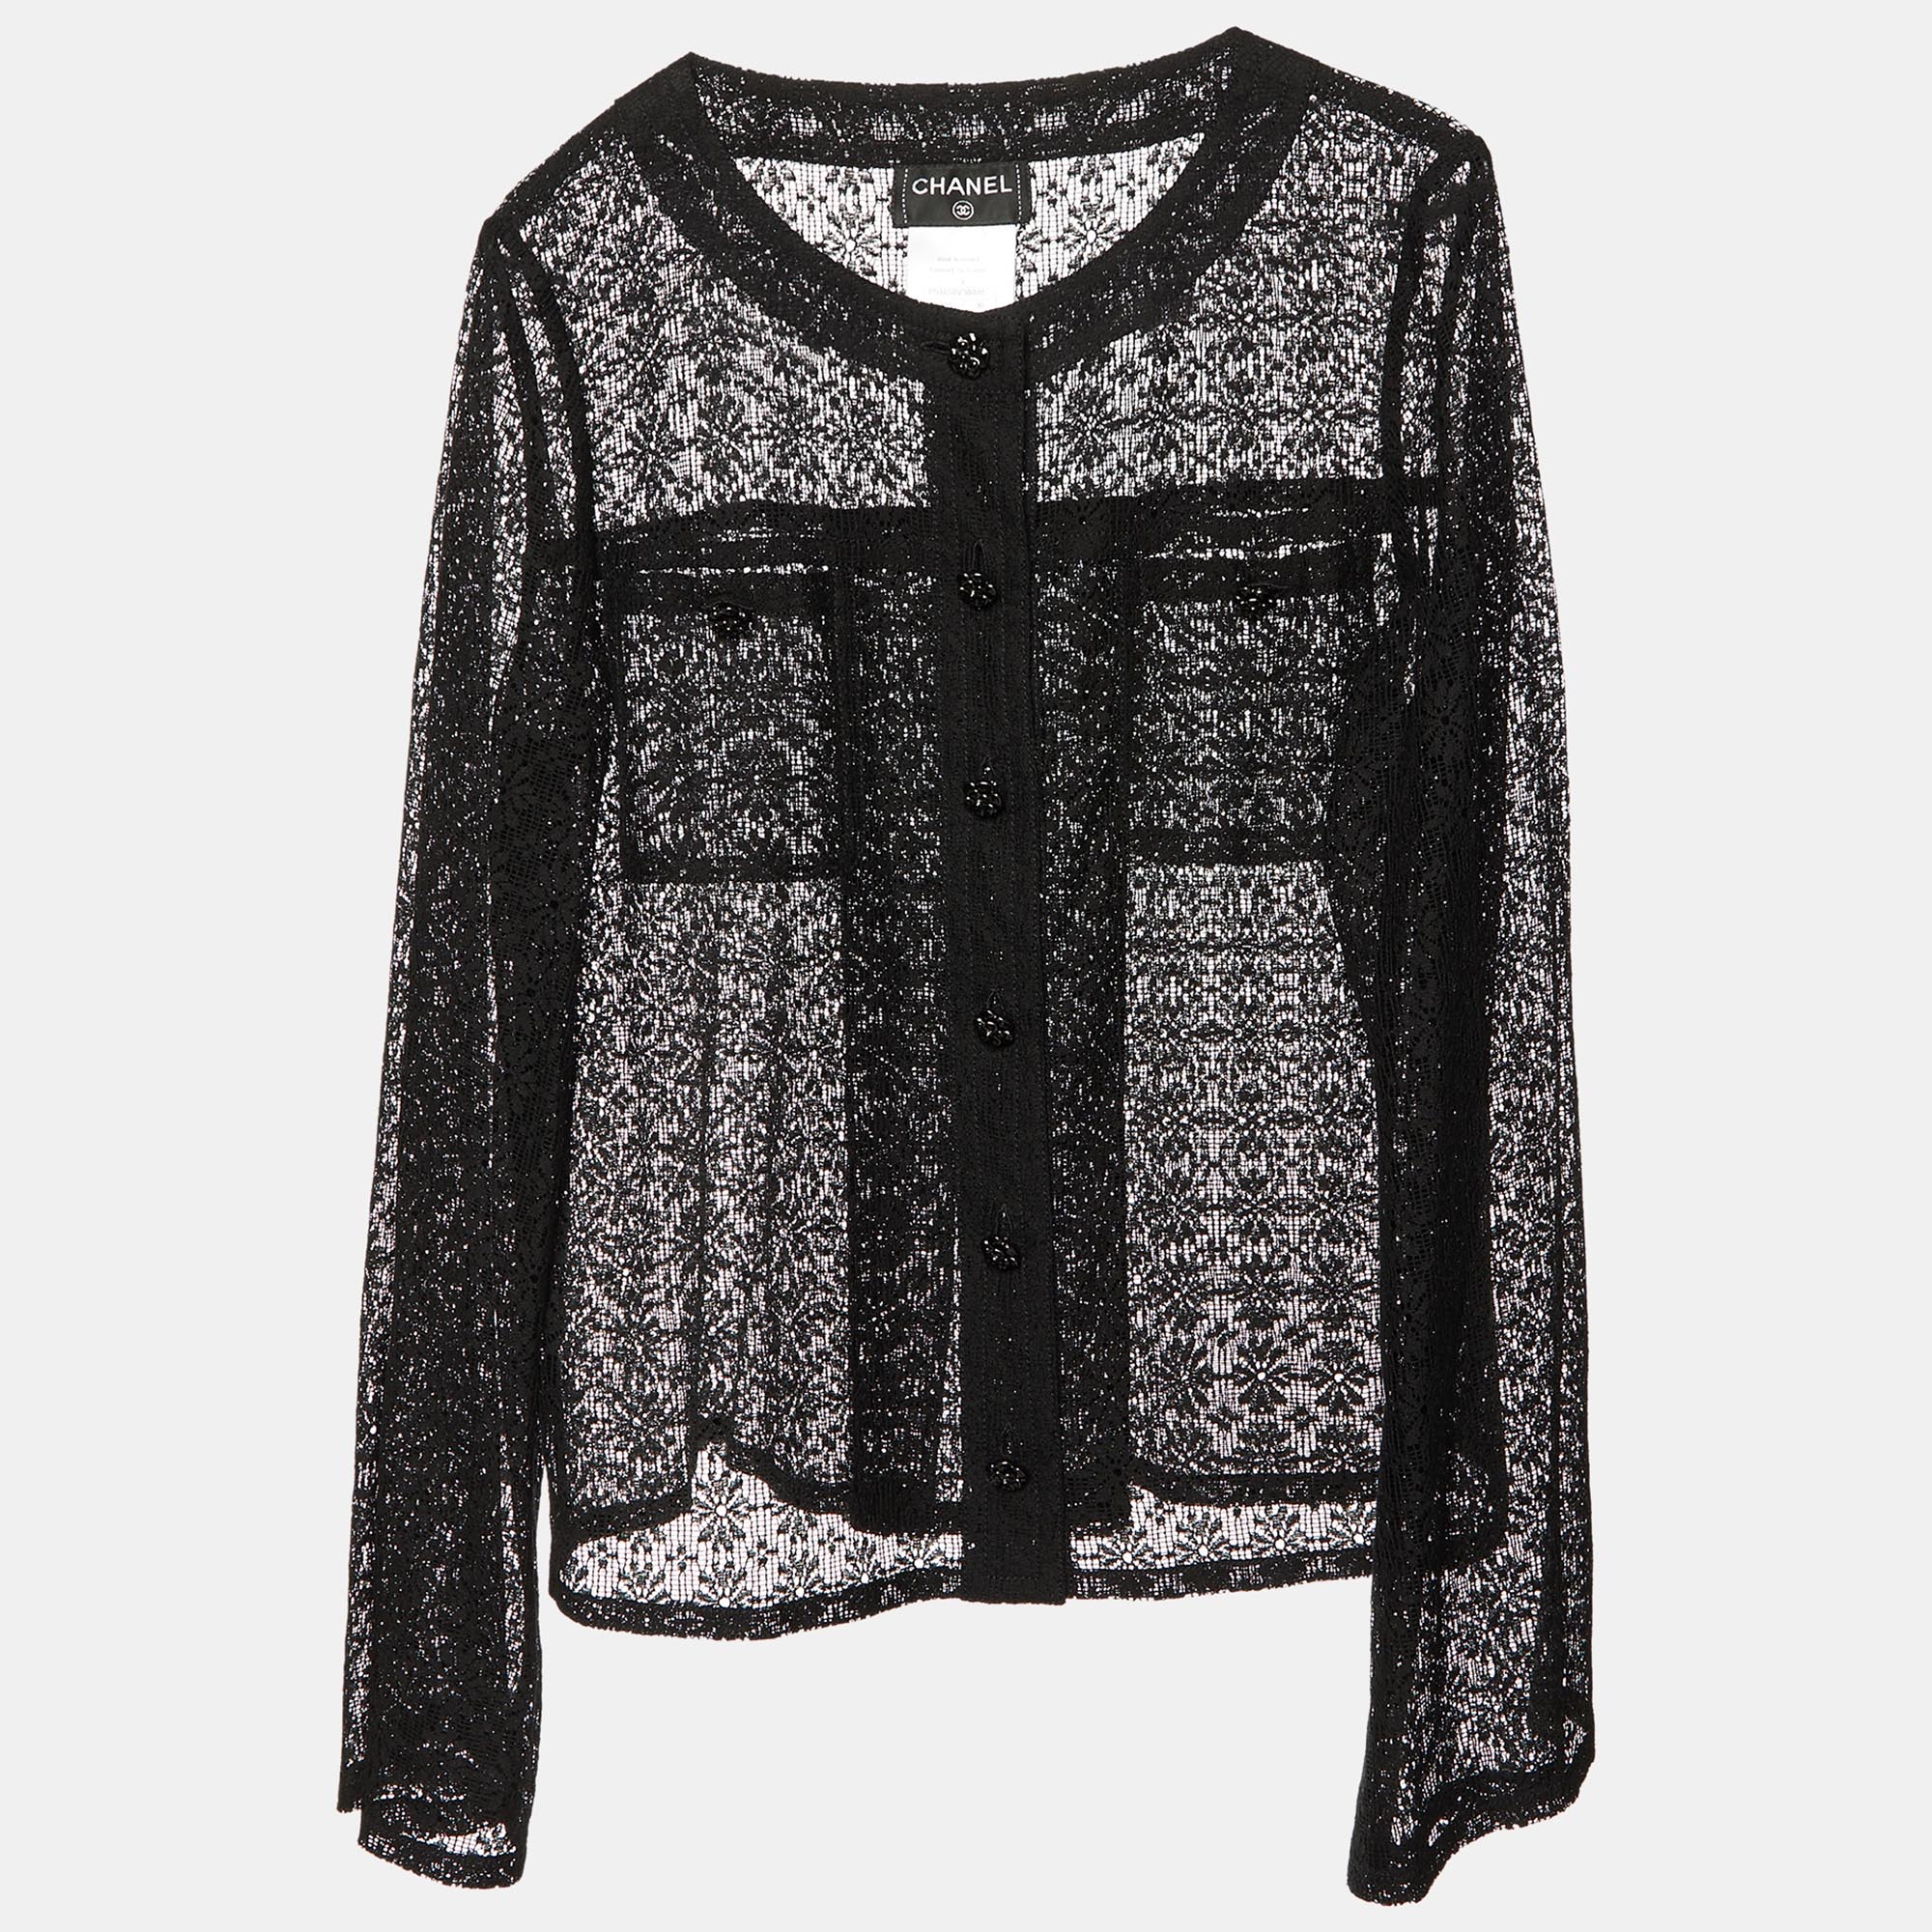 Chanel black floral lace buttoned top s